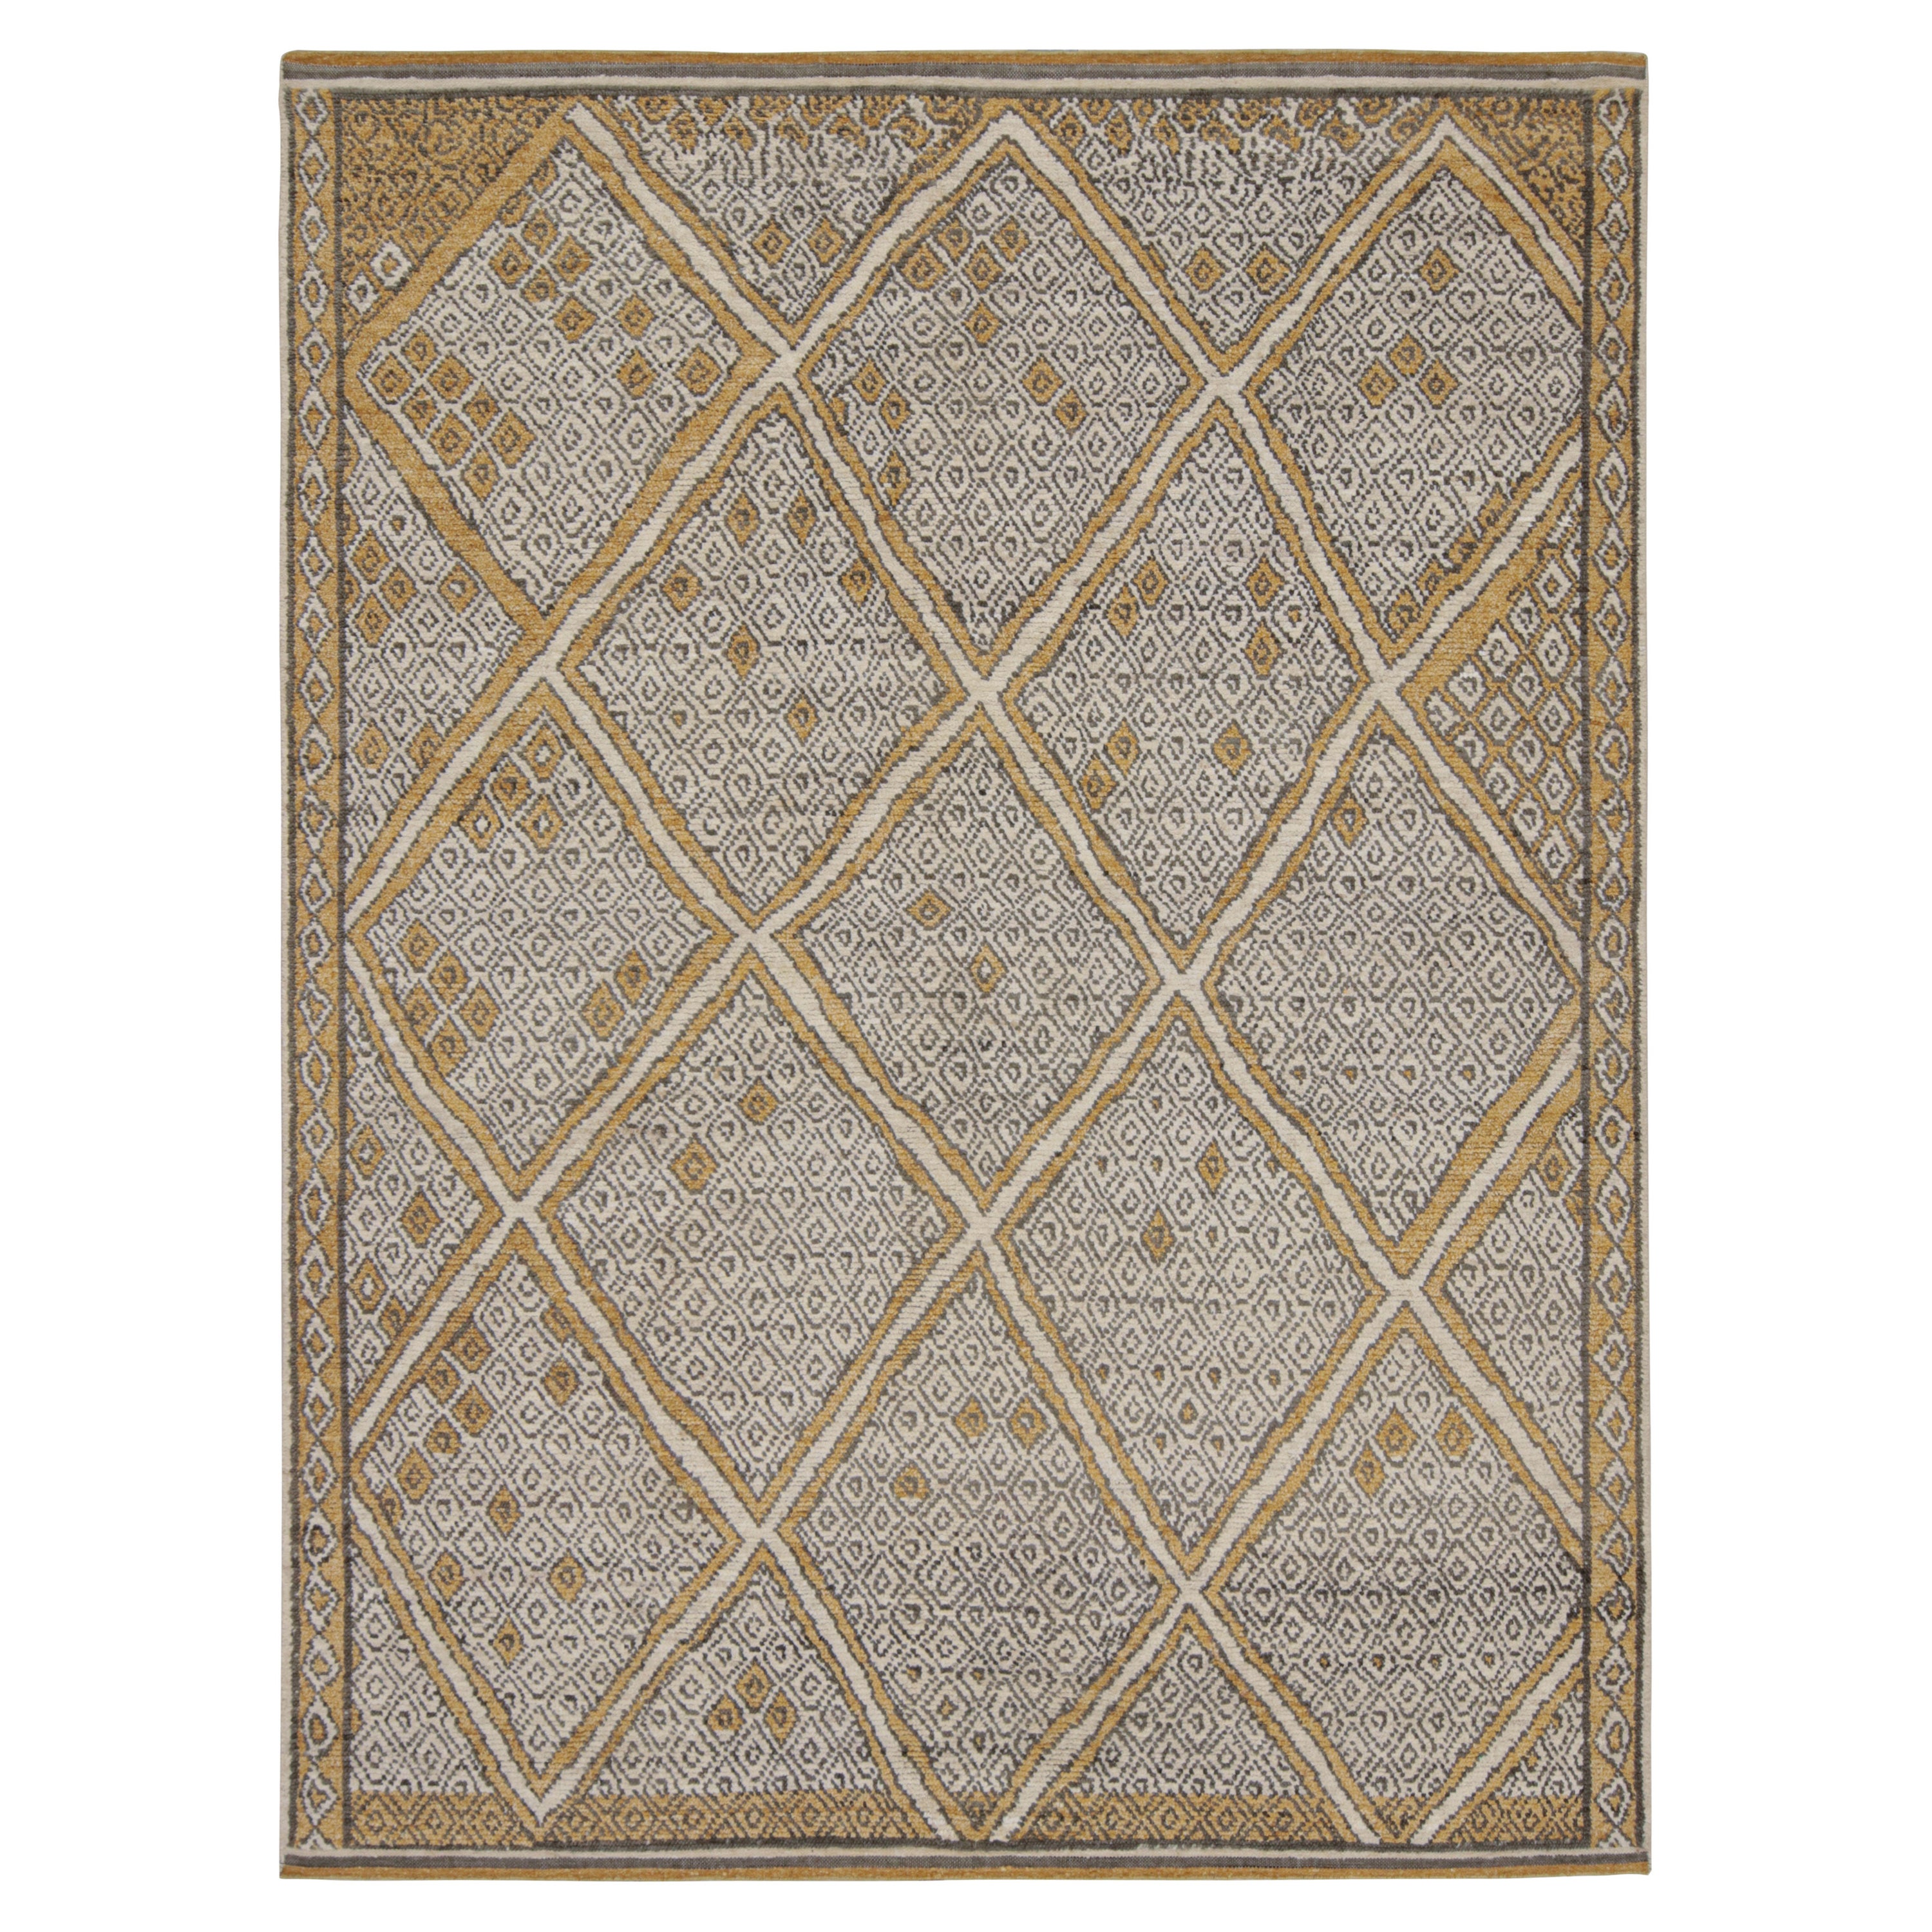 Rug & Kilim’s Contemporary Moroccan Style Rug with Berber Geometric Patterns For Sale